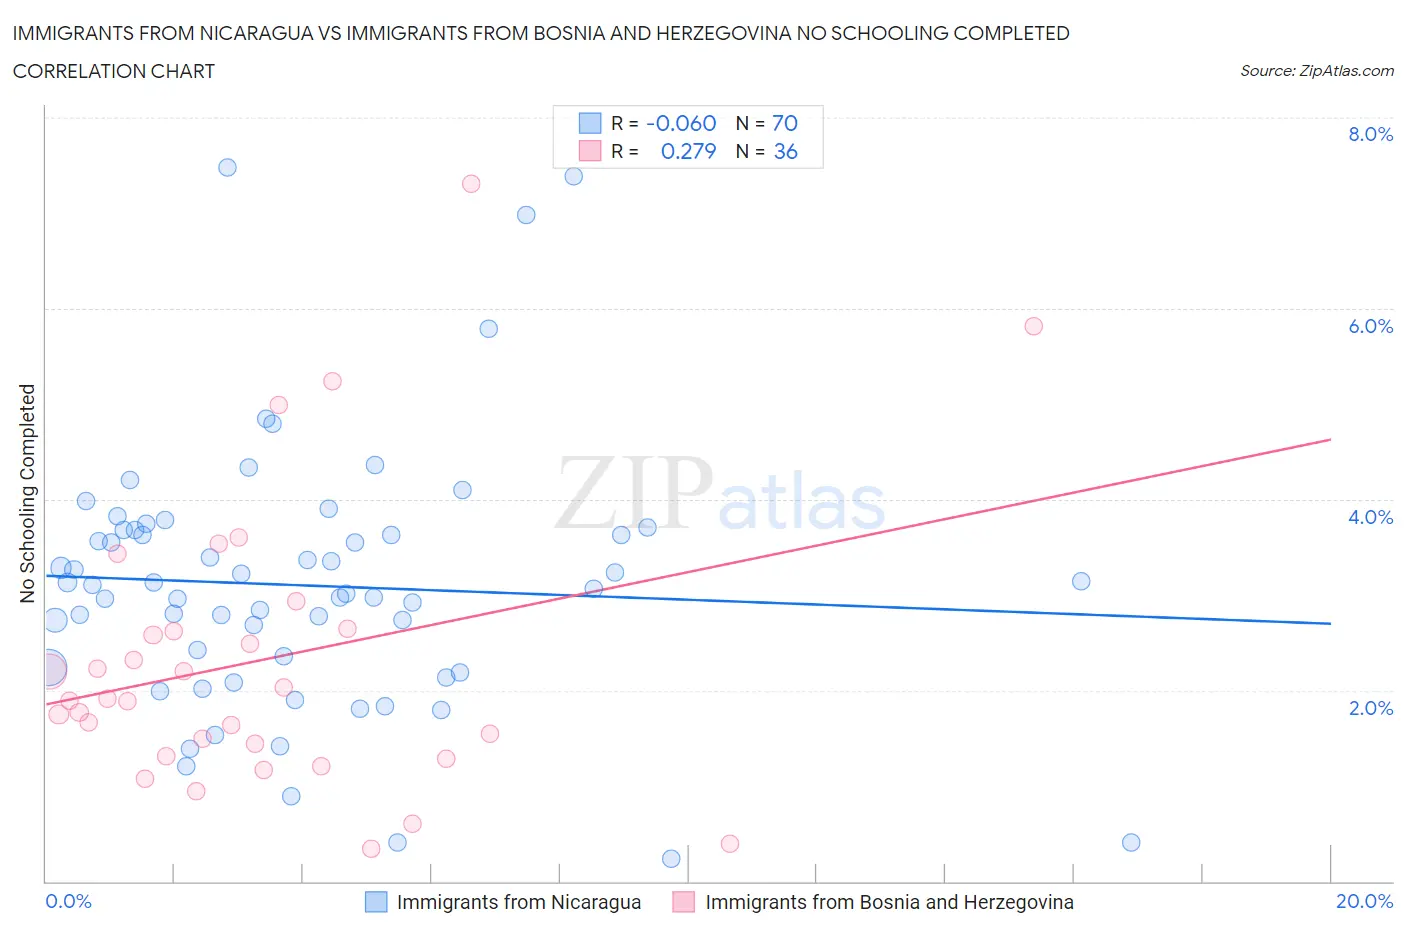 Immigrants from Nicaragua vs Immigrants from Bosnia and Herzegovina No Schooling Completed